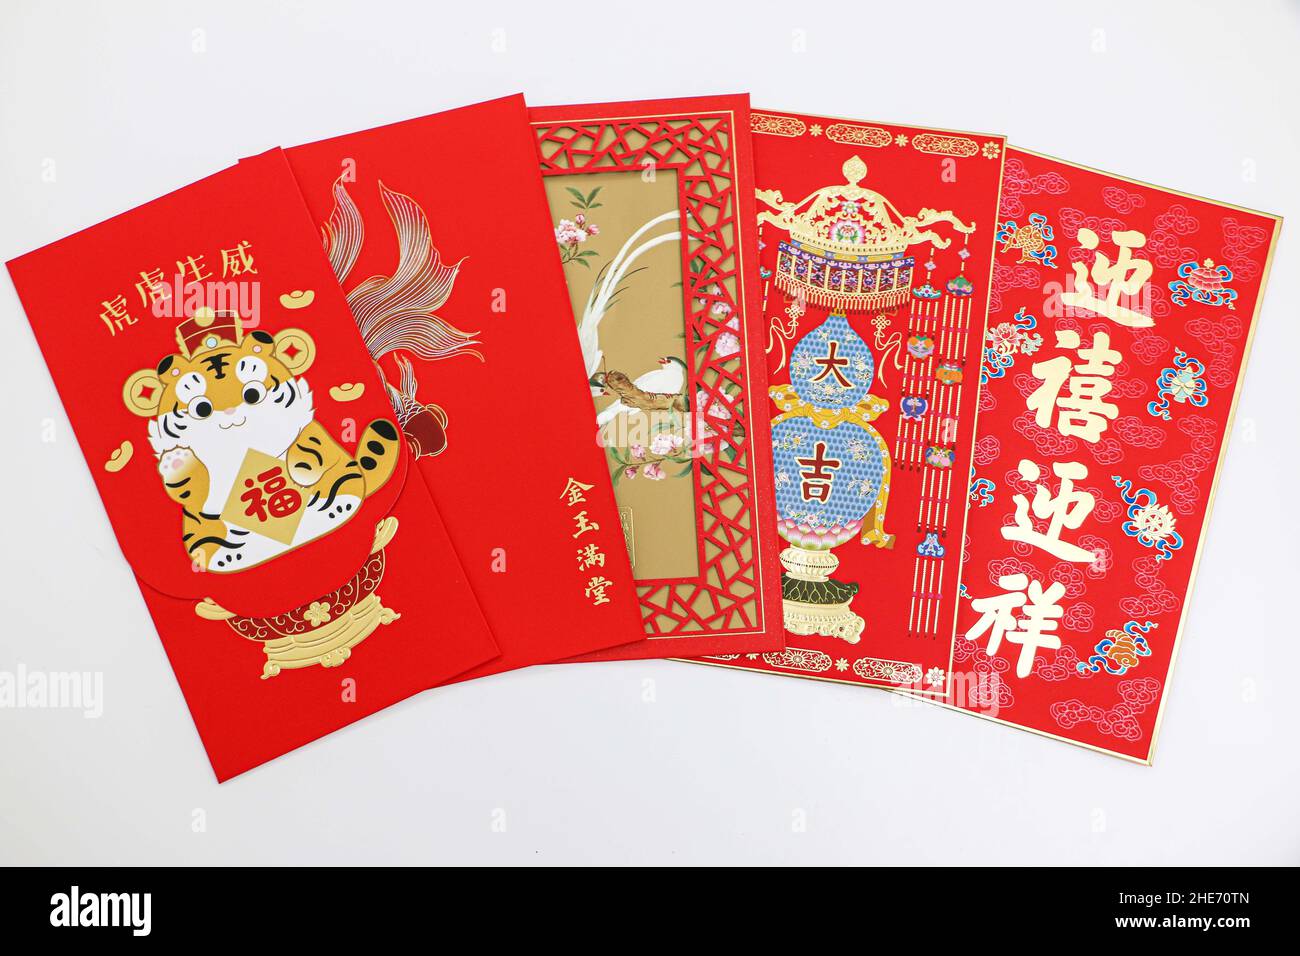 47 Angbao d ideas  red packet, red pocket, red envelope design